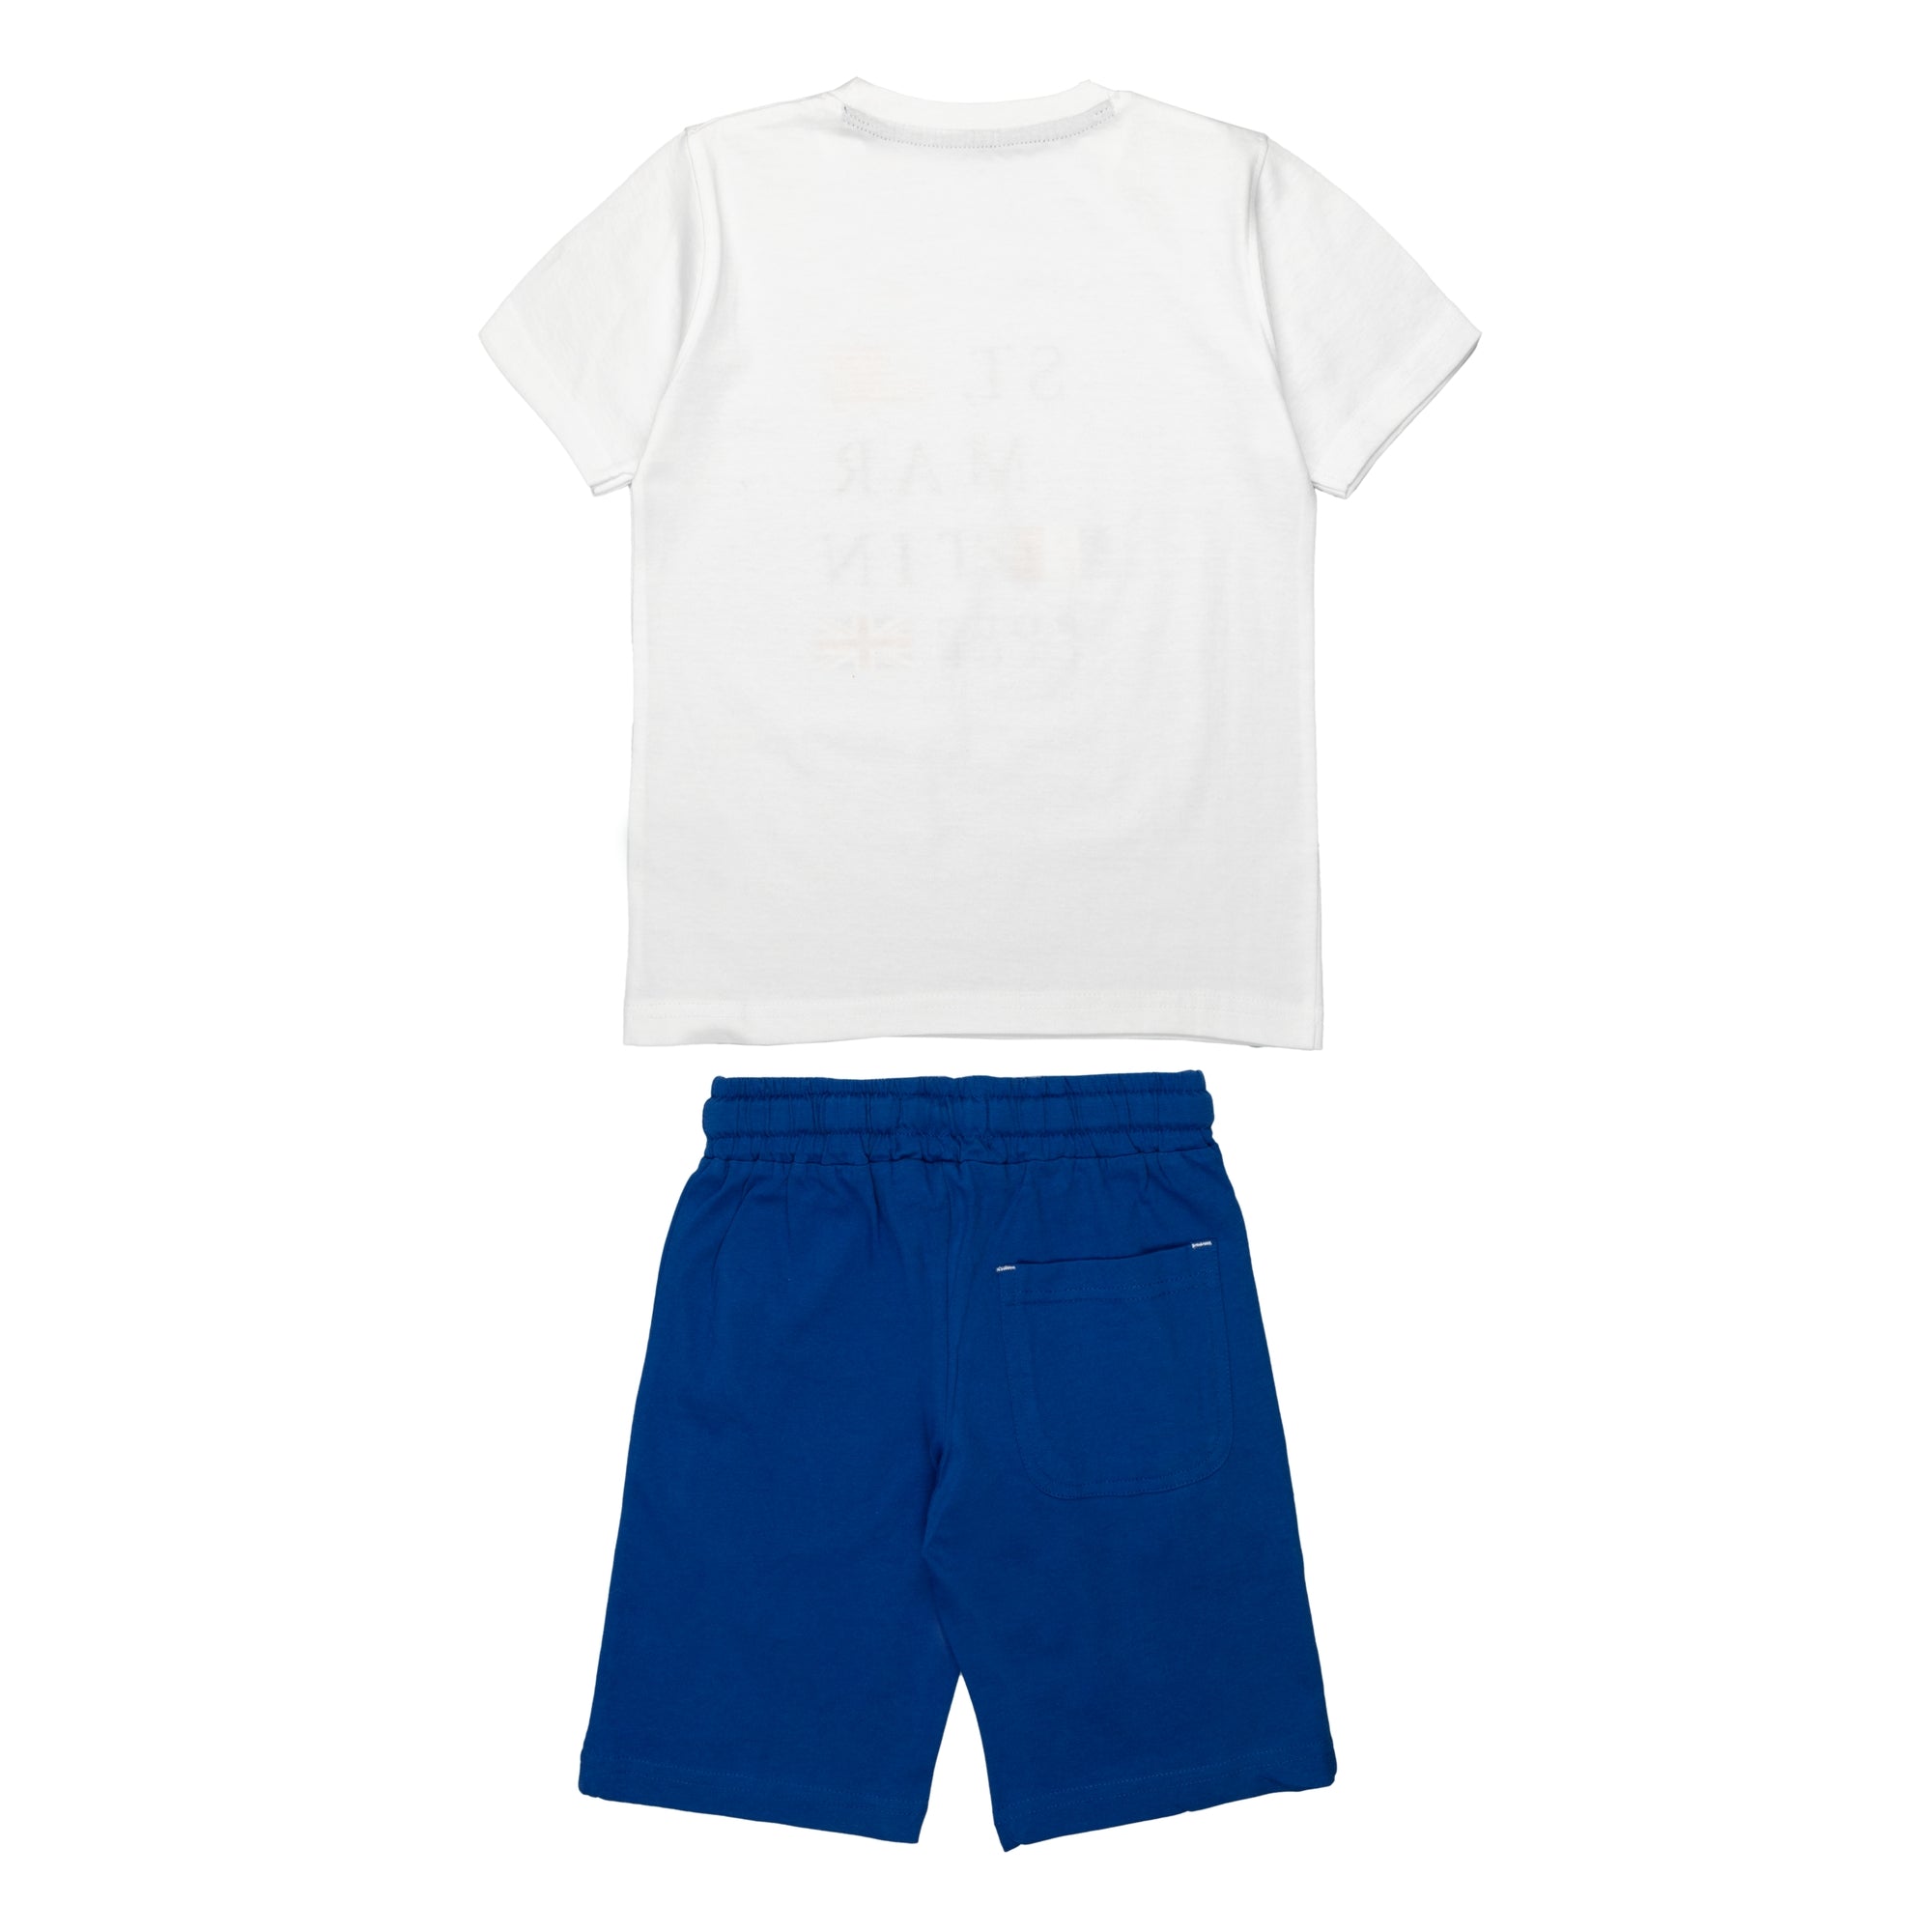 T-shirt and jersey shorts set with flags logo print